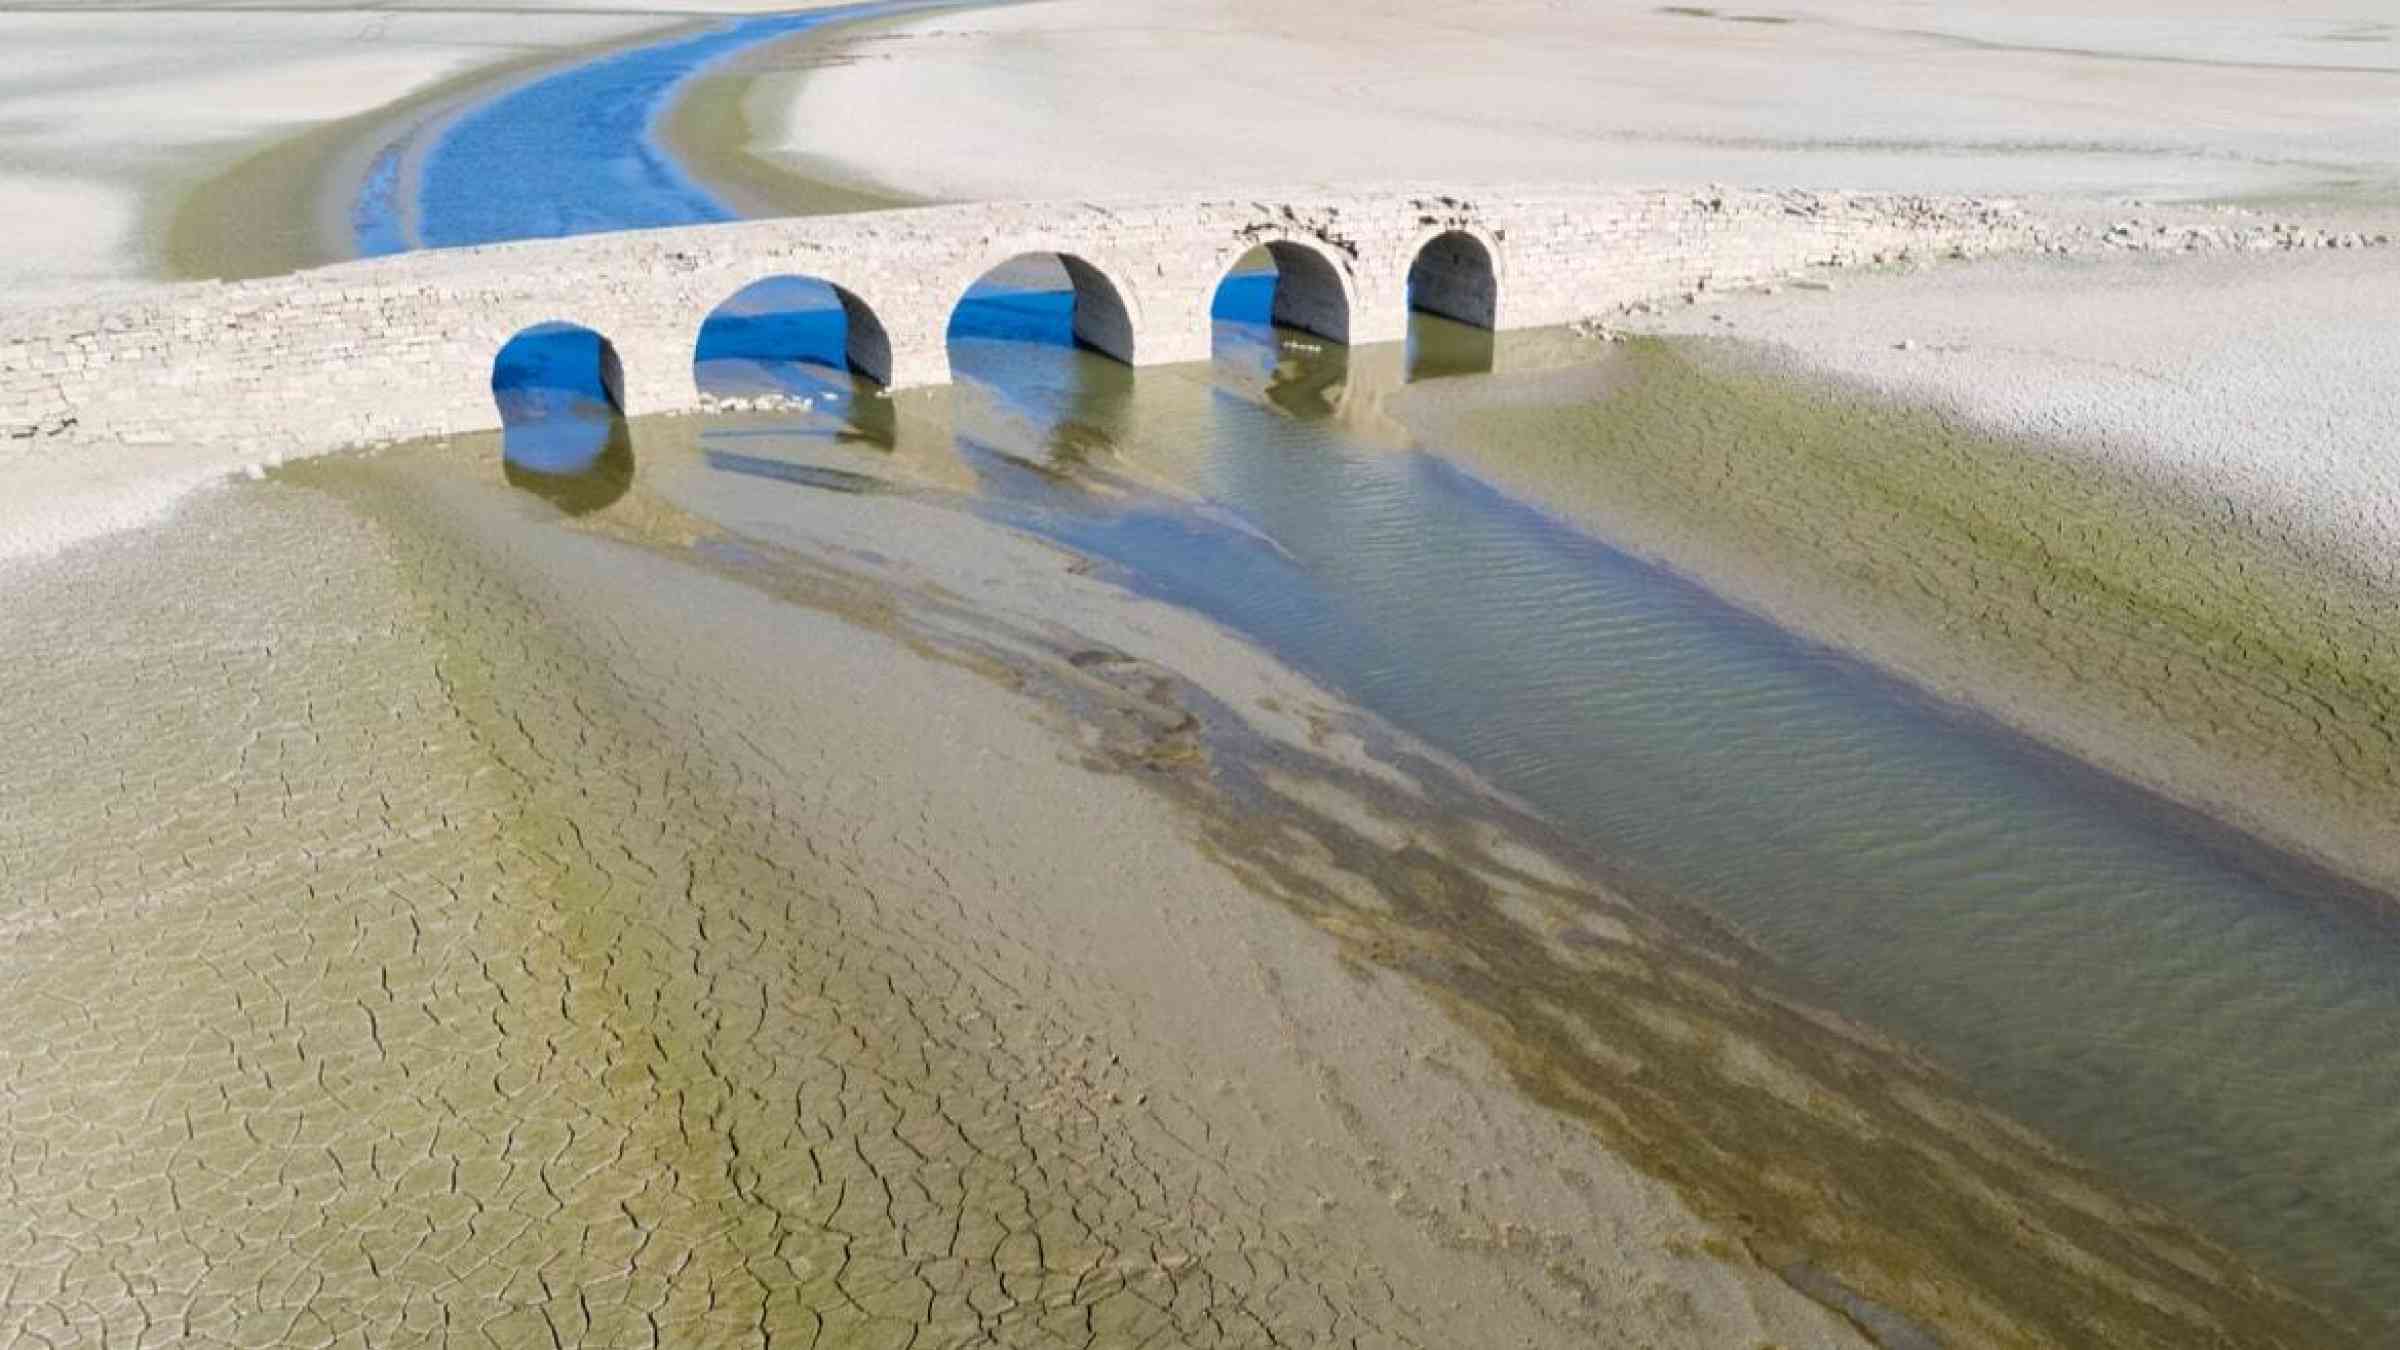 A Ming dynasty bridge is exposed by very low water levels in a river in Jiangxi province, China